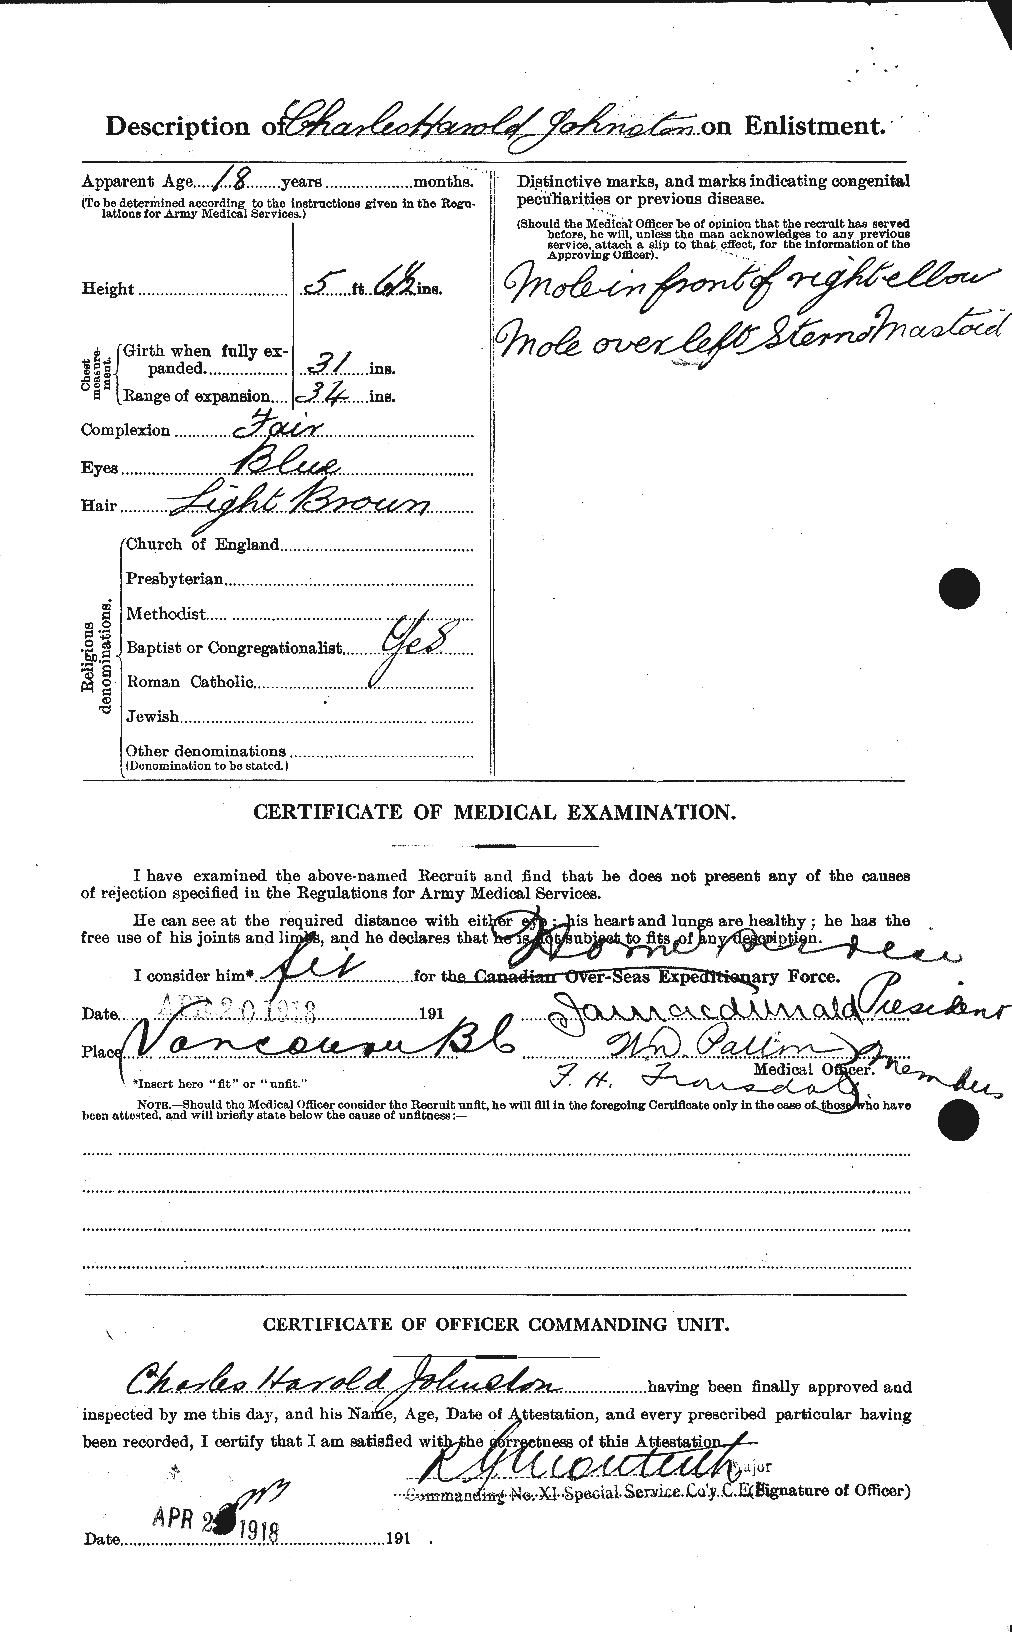 Personnel Records of the First World War - CEF 423125b